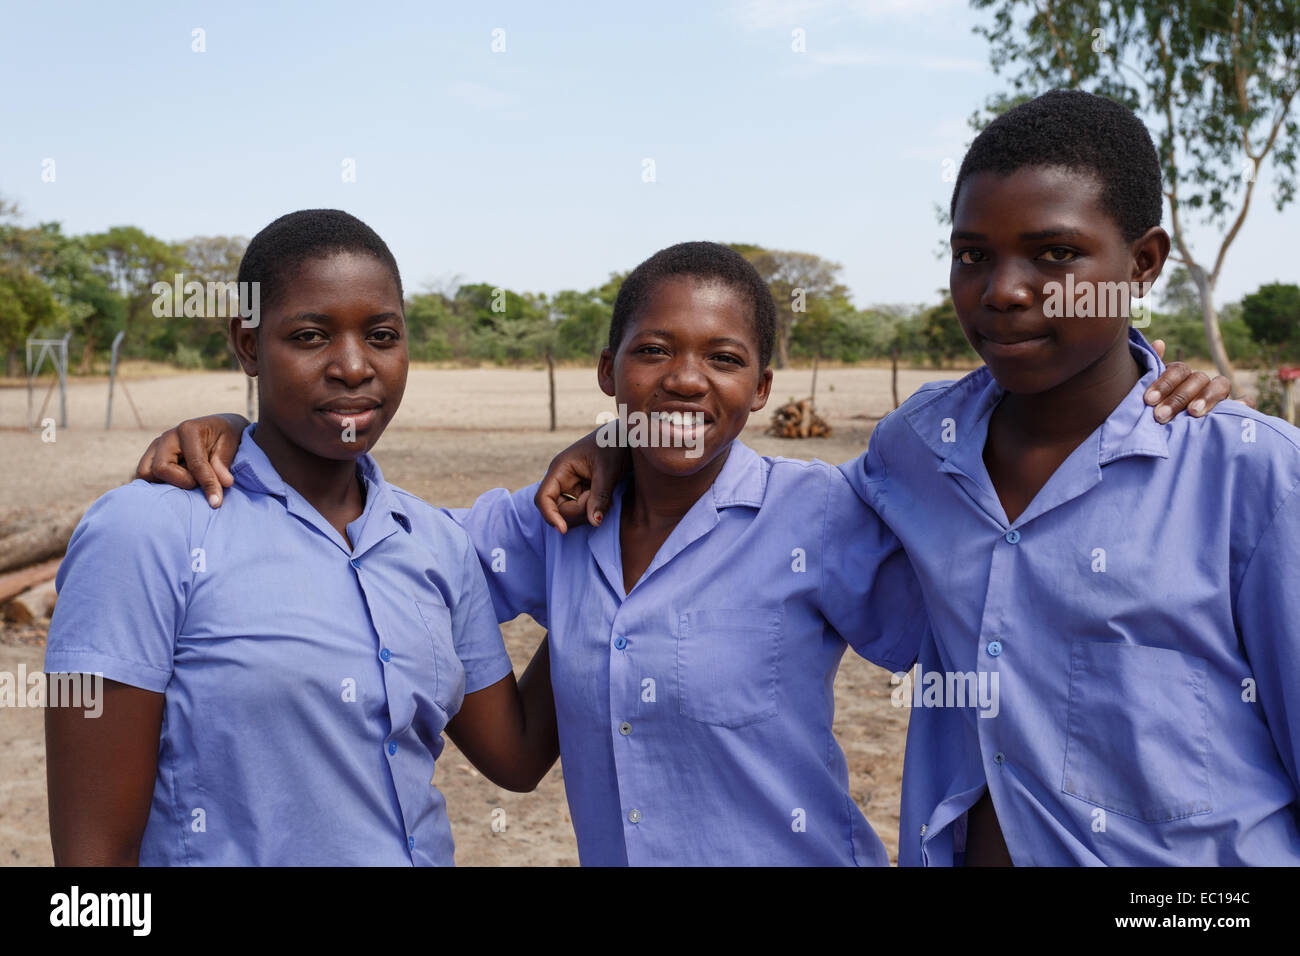 NAMIBIA, KAVANGO, OCTOBER 15: Happy Namibian school children waiting for a lesson. Kavango was the region with the highest pover Stock Photo